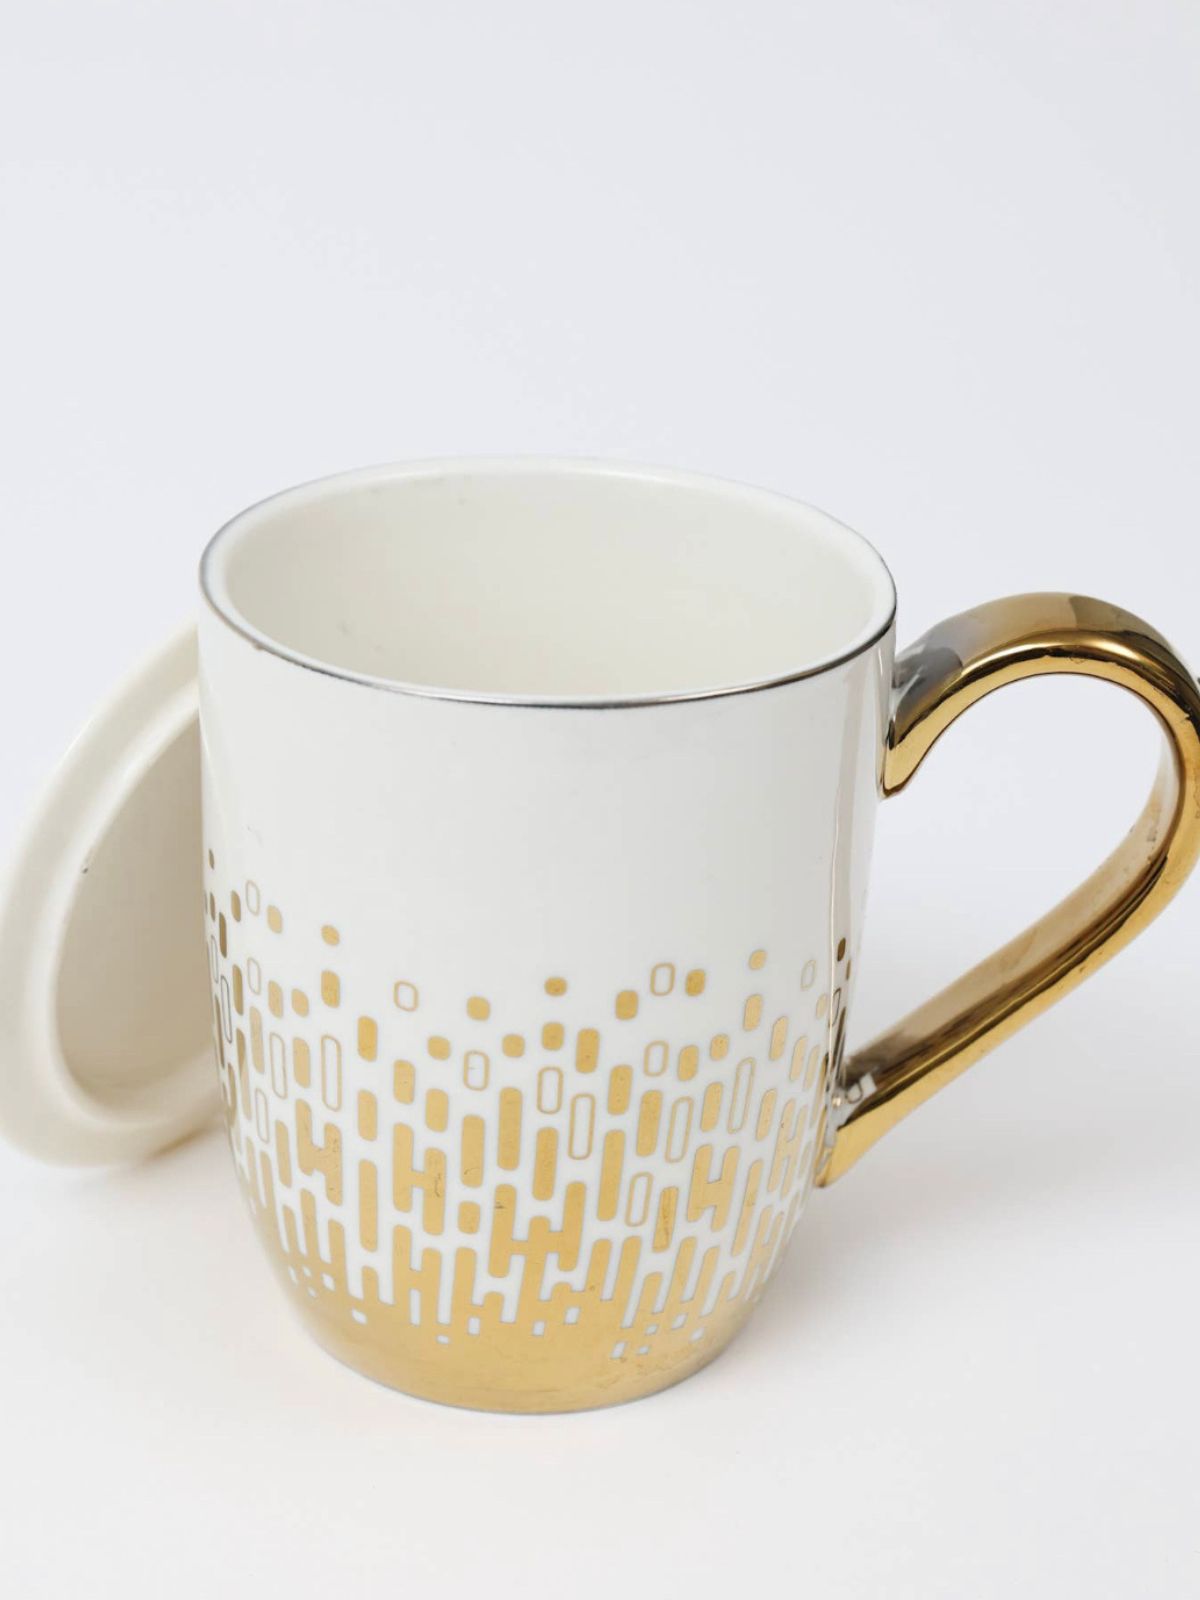 This white and gold design mug with a ceramic lid has a timeless look and is sure to elevate your coffee station!